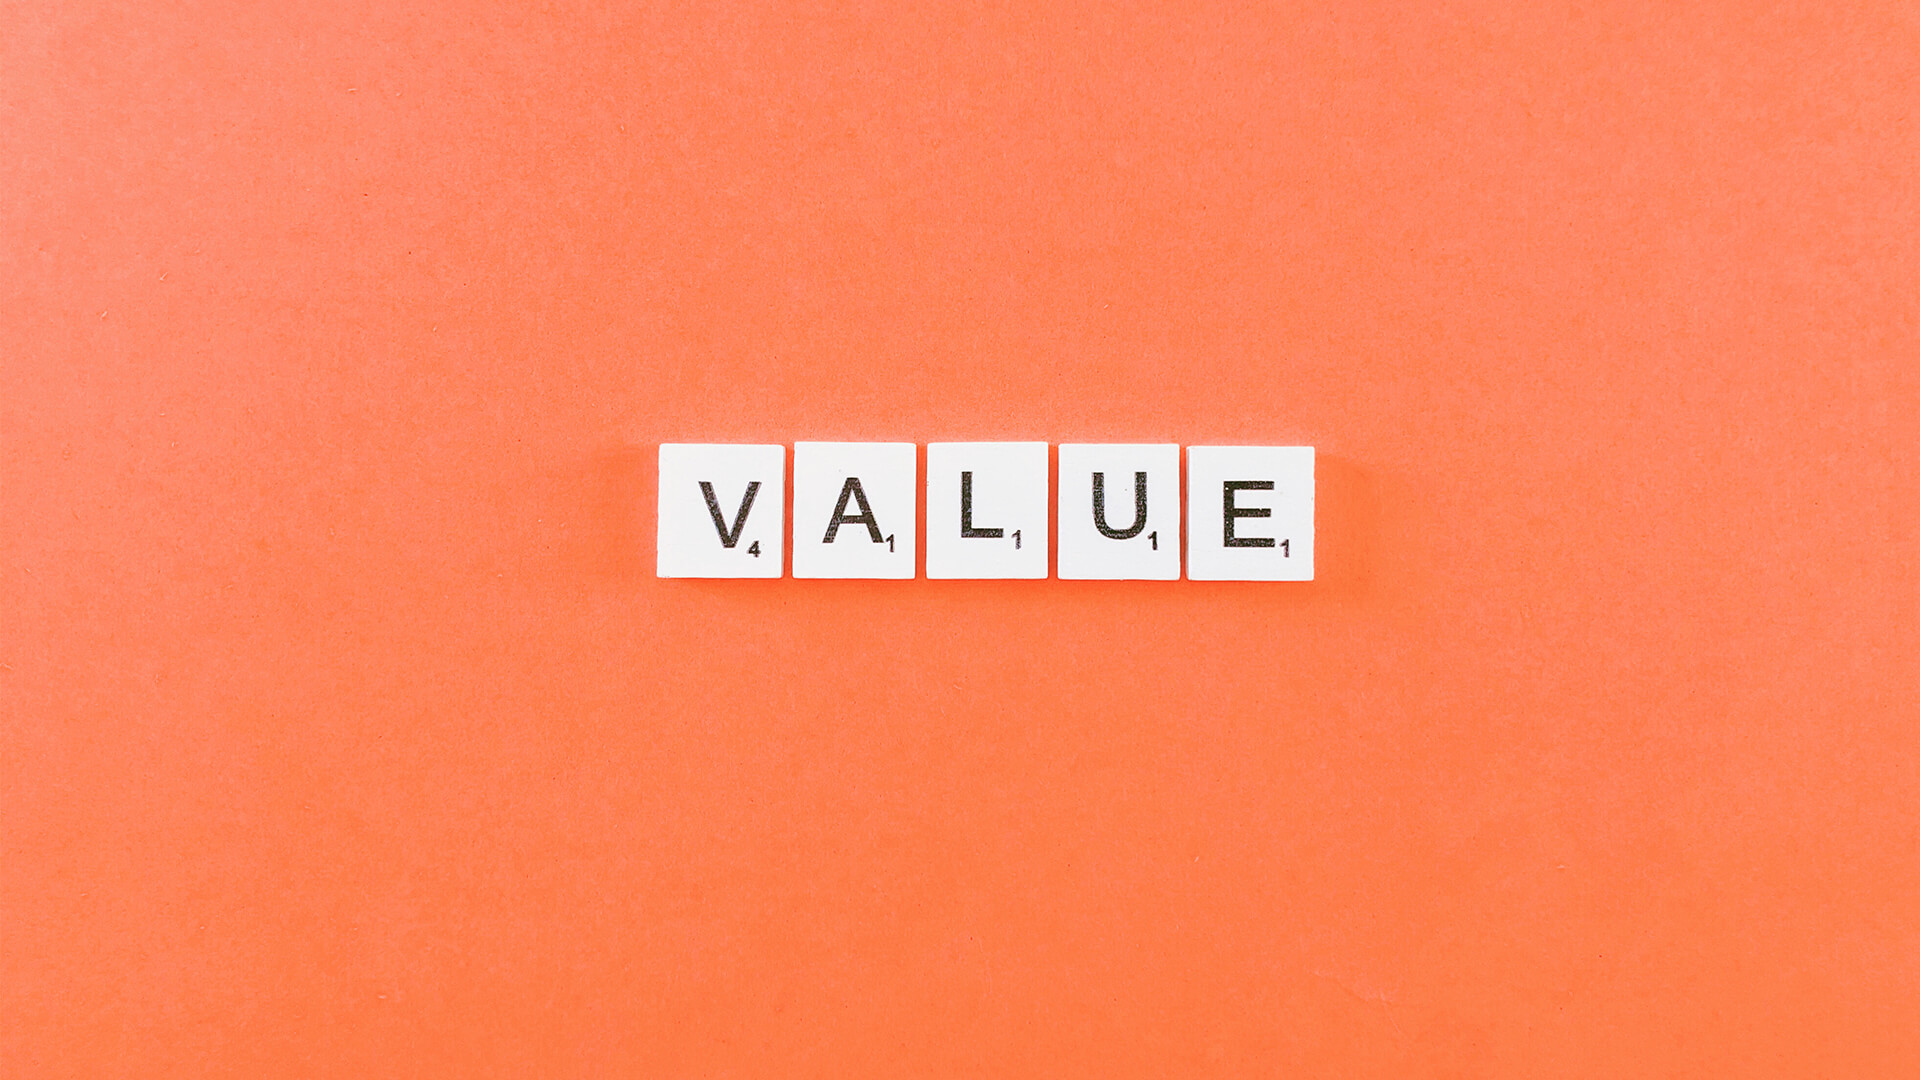 Strive To Be Of Value